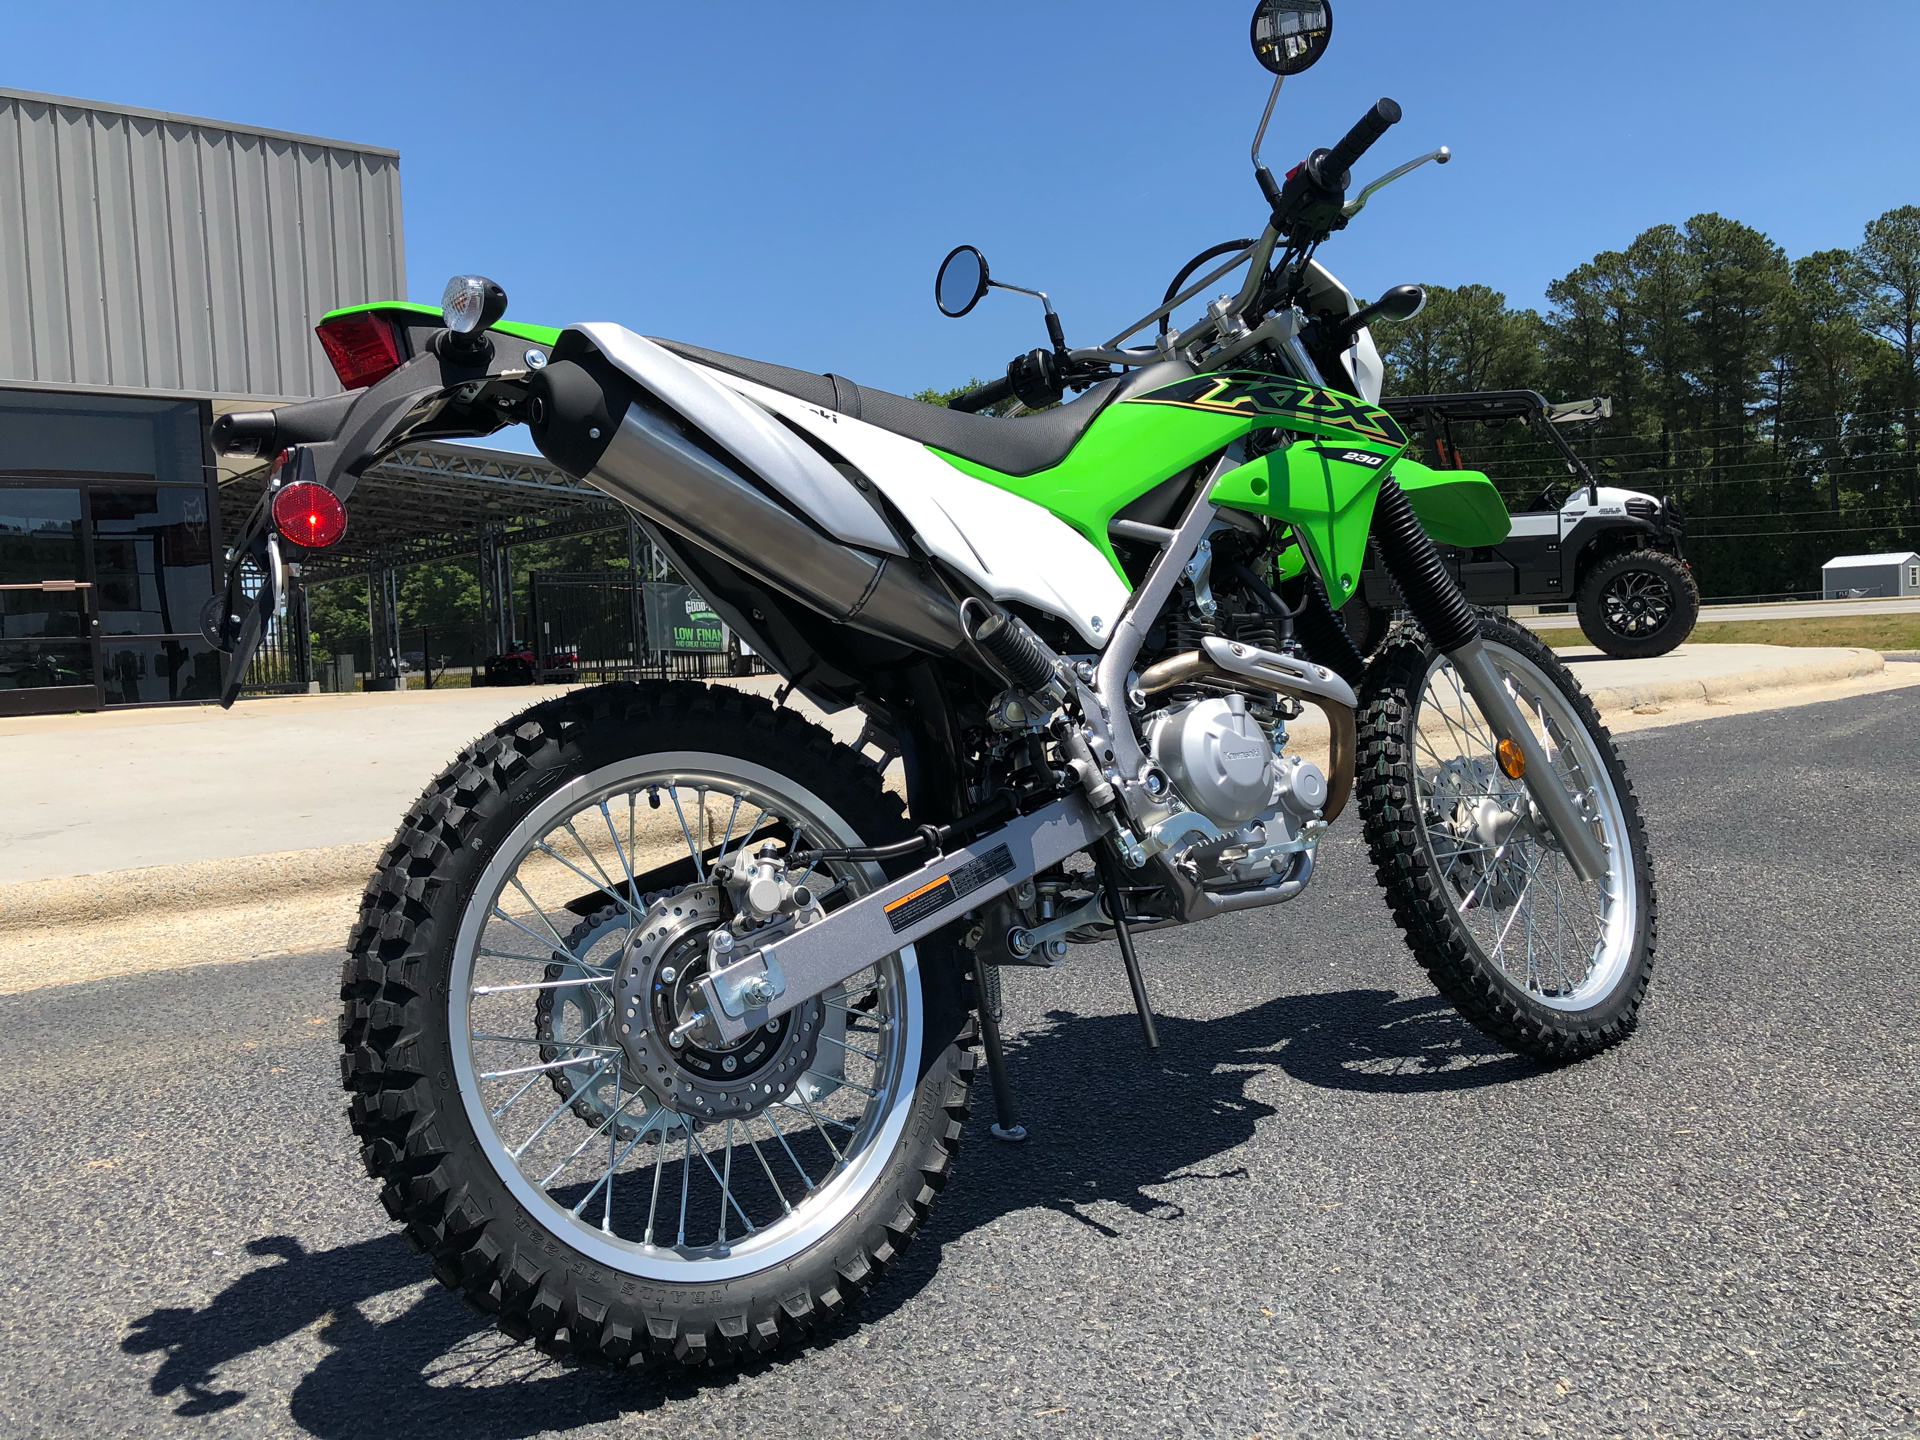 New 2021 KLX 230 ABS Motorcycles in Greenville, NC | Stock Number: N/A